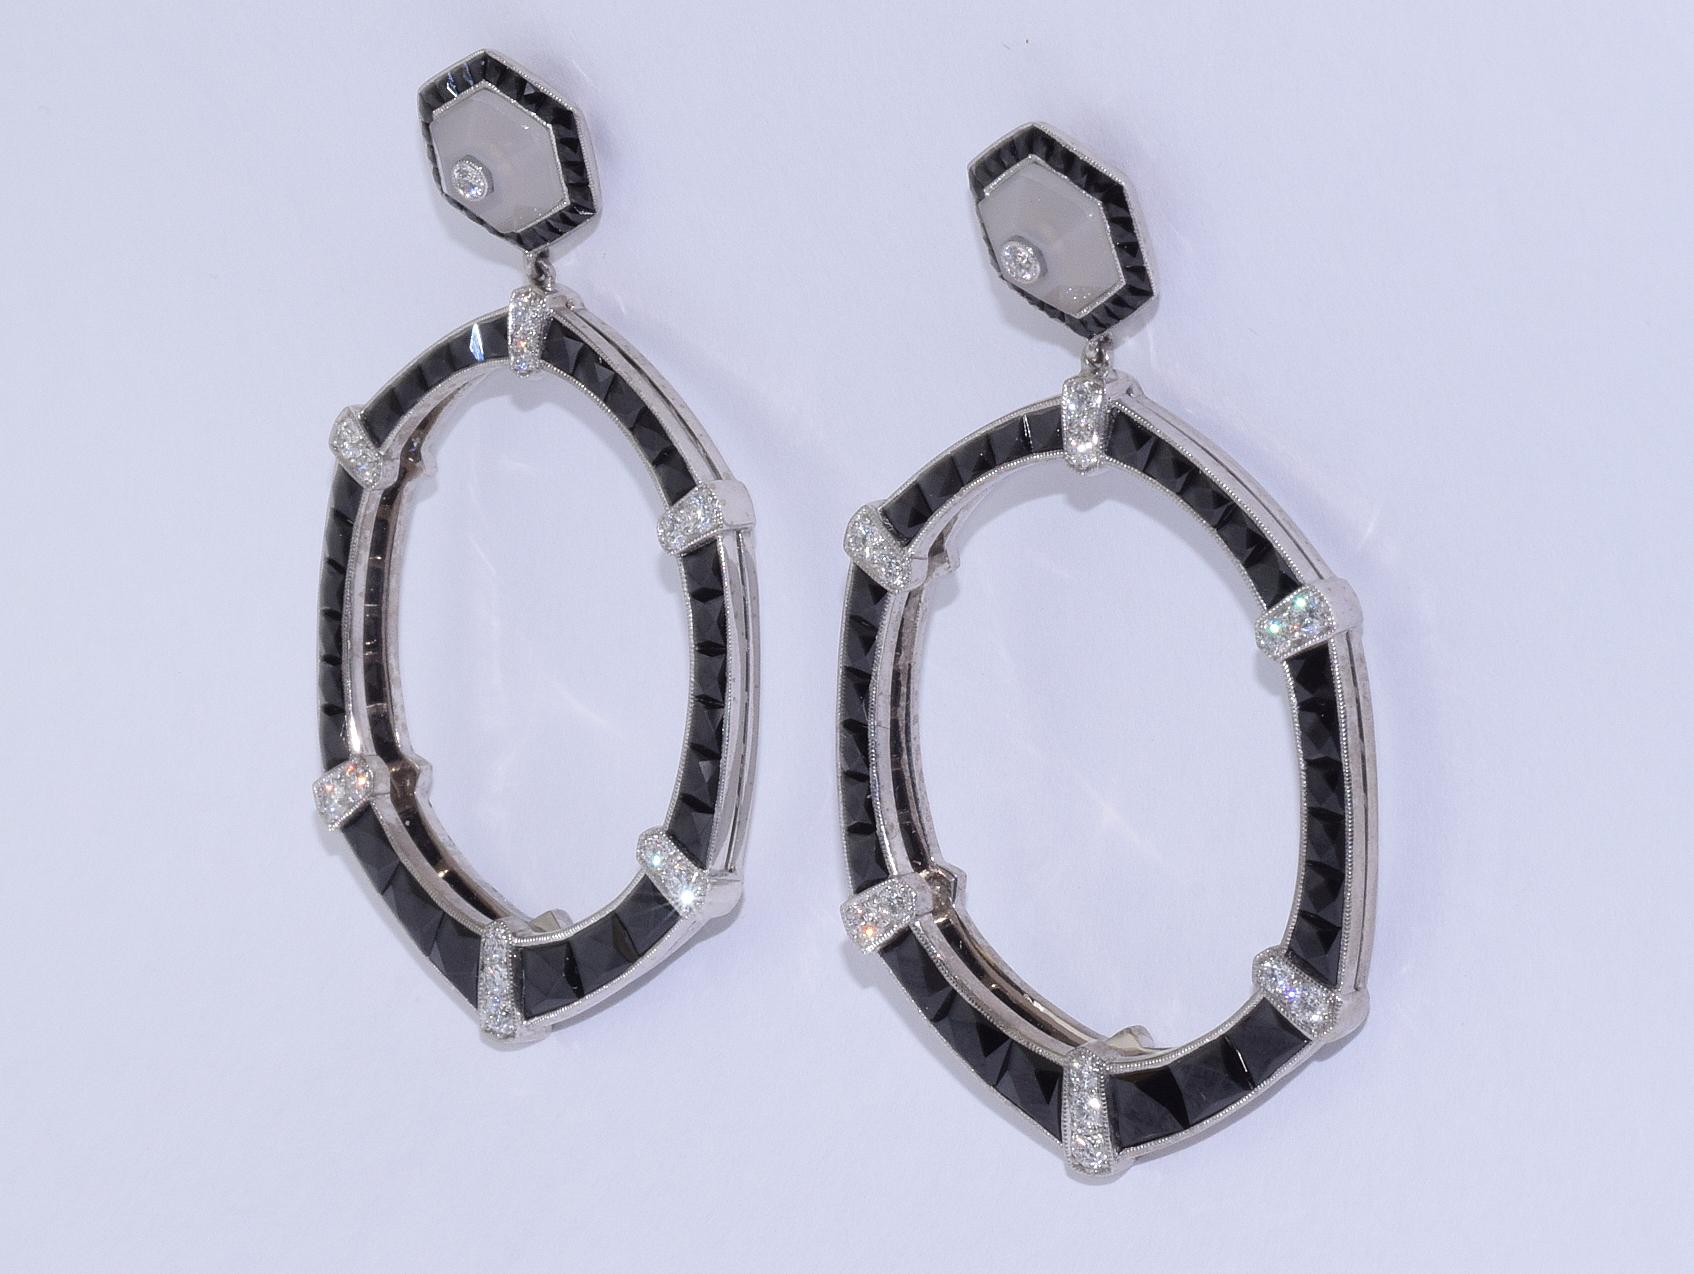 Calibre French cut onyx front facing hoops accented with round diamonds totaling approximately 0.87 carat are suspended from hexagons in grey chalcedony mounted in 18 karat white gold. The earrings measure approximately 2.2 inches in length and are